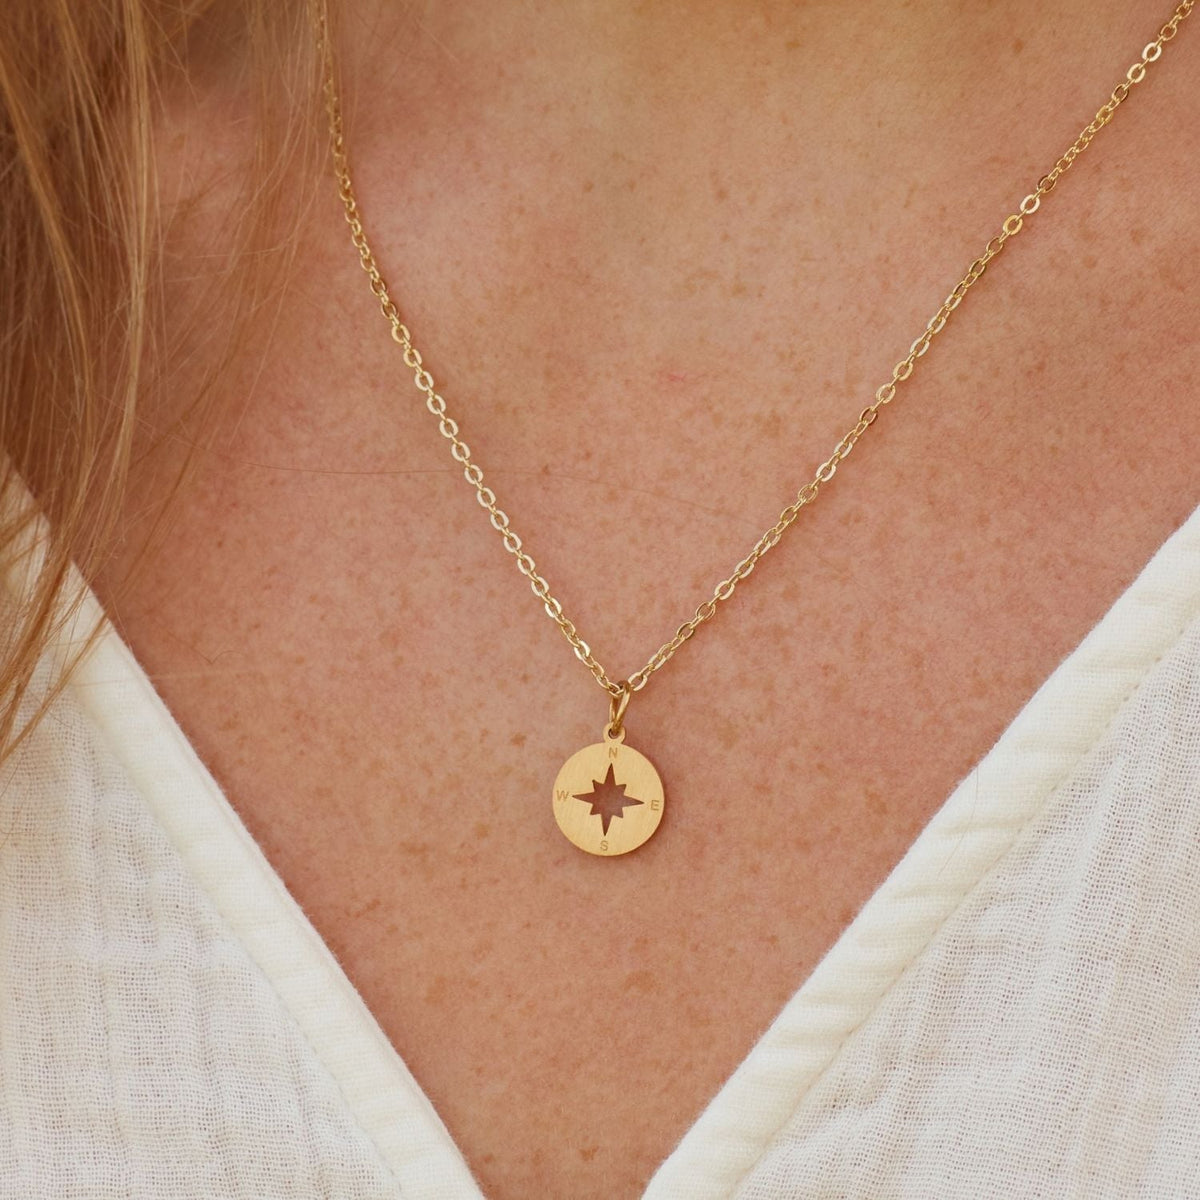 In Loving Memory of your Mom | Her Memory a Treasure | Compass Necklace